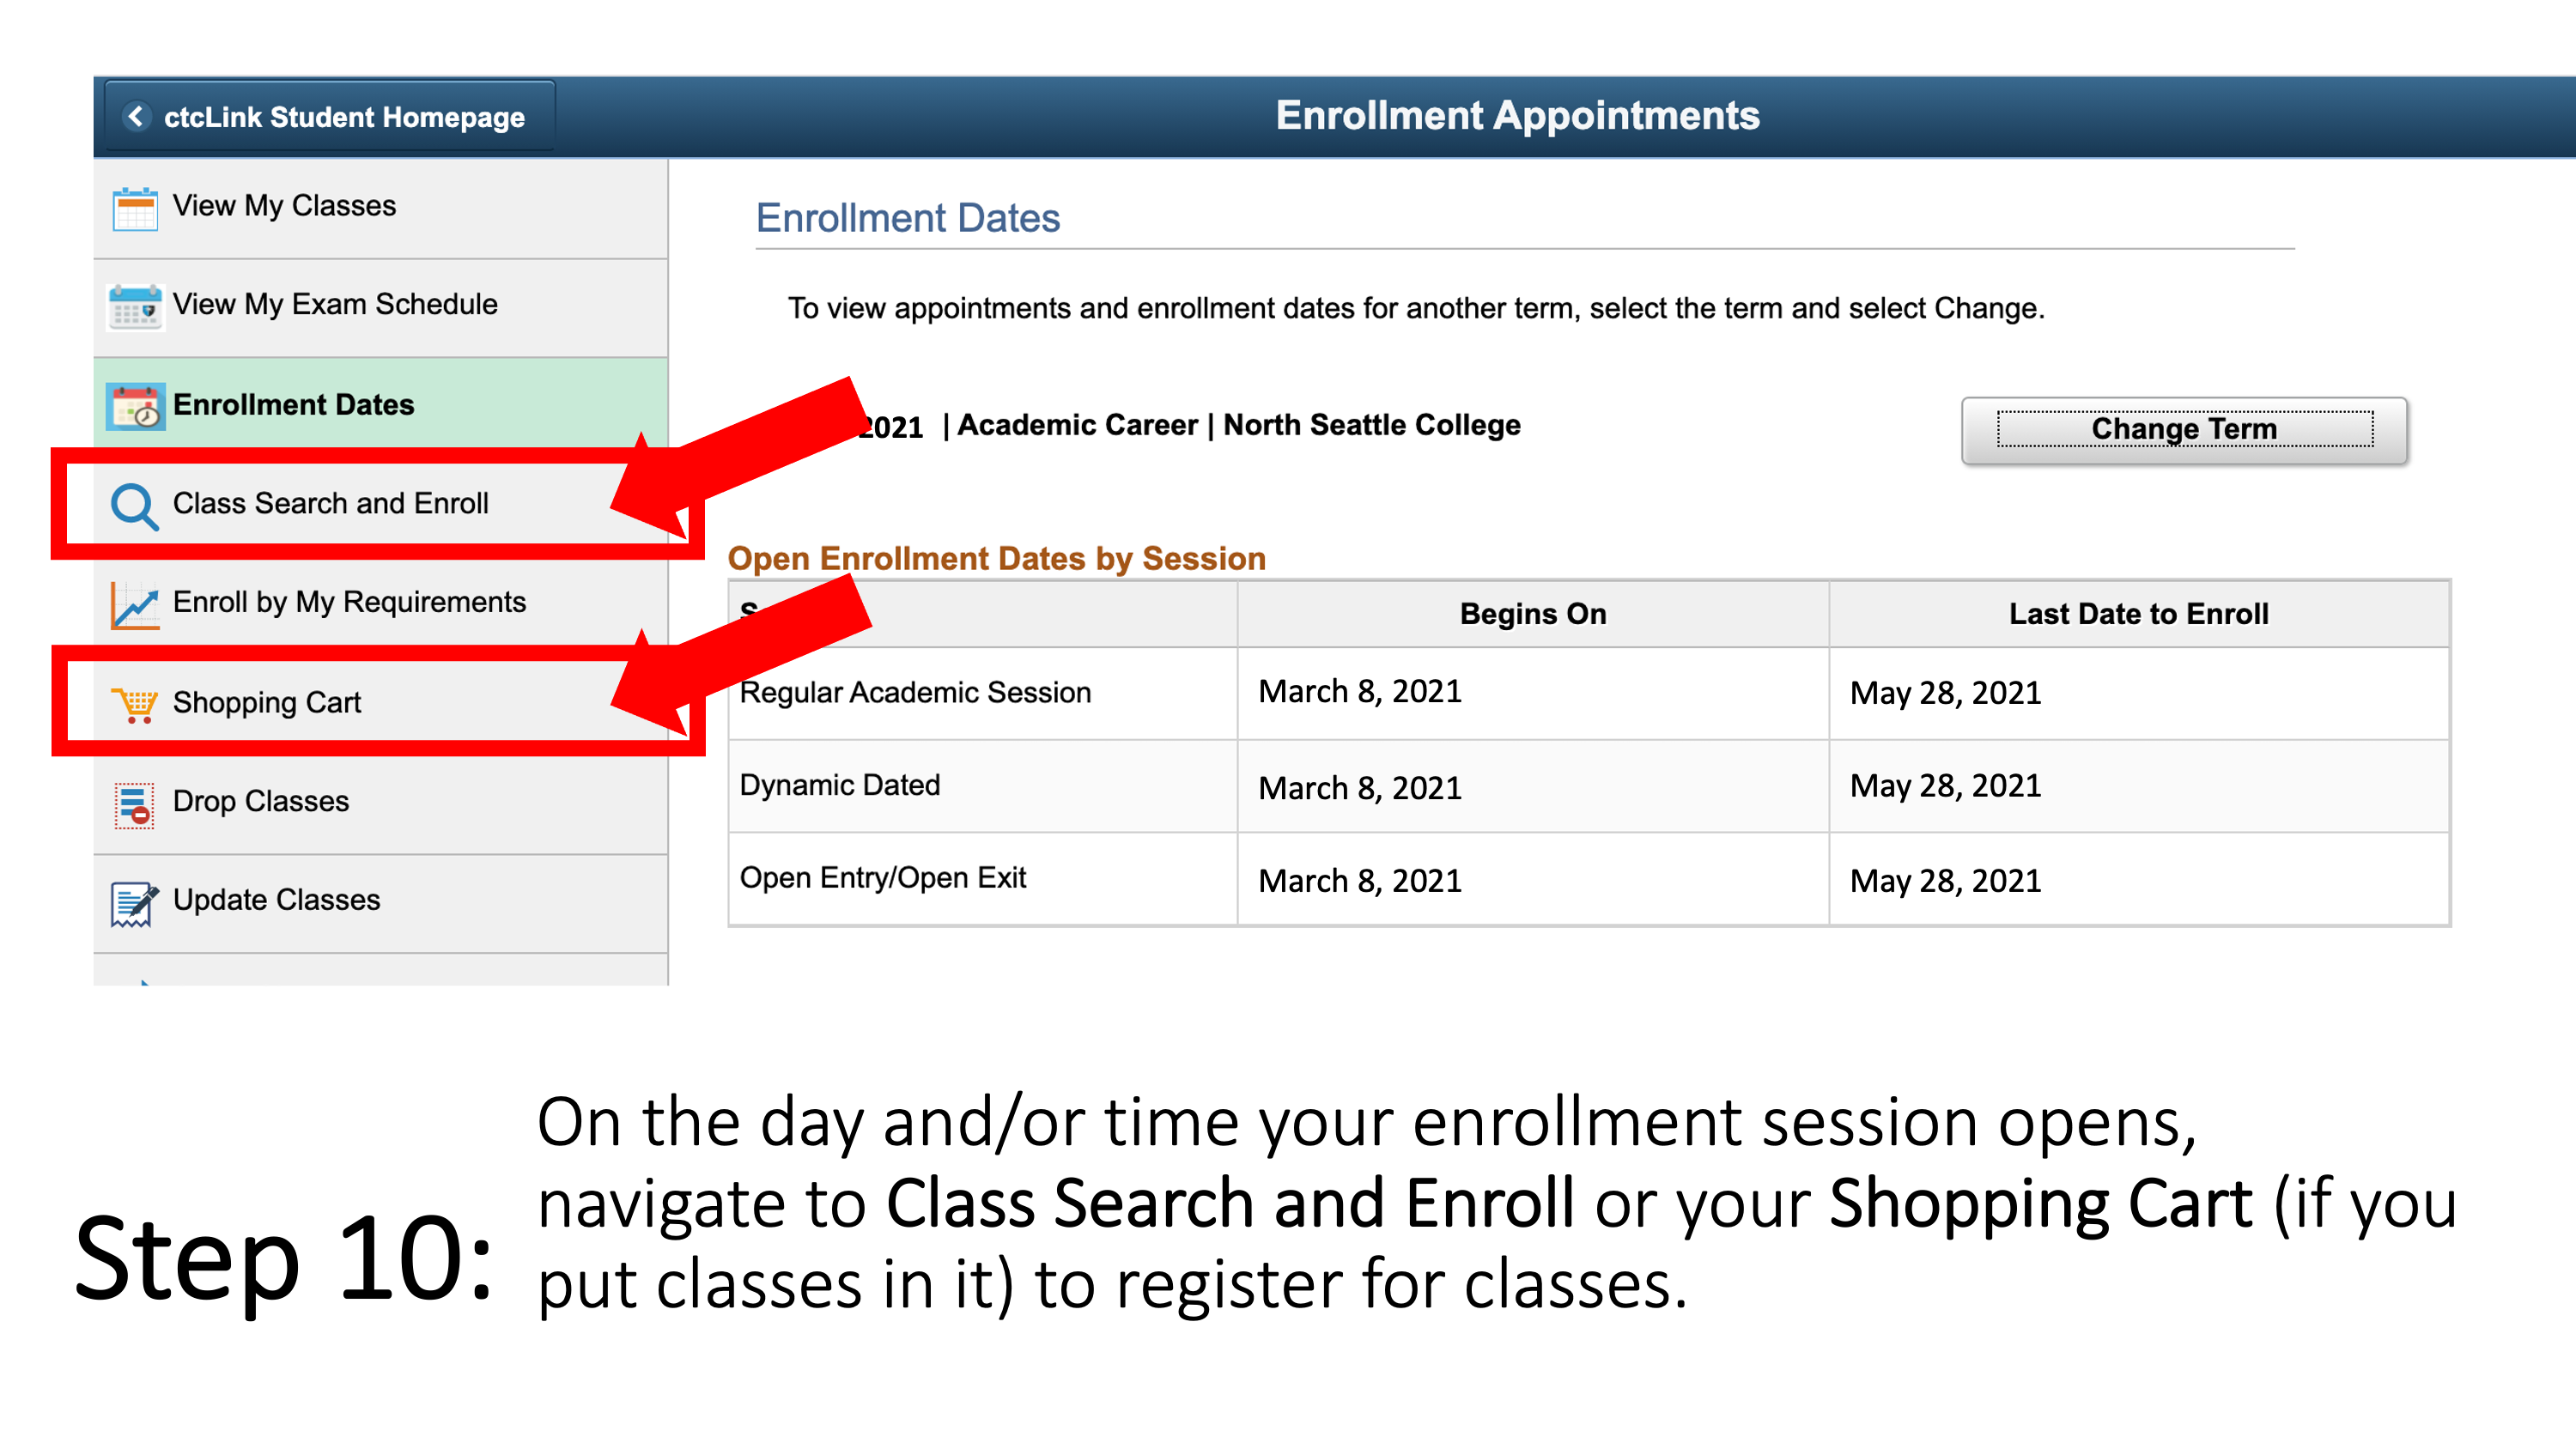 On the day and/or time your enrollment session opens, navigate to Class Search and Enroll or your Shopping Cart (if you put classes in it) to register for classes.